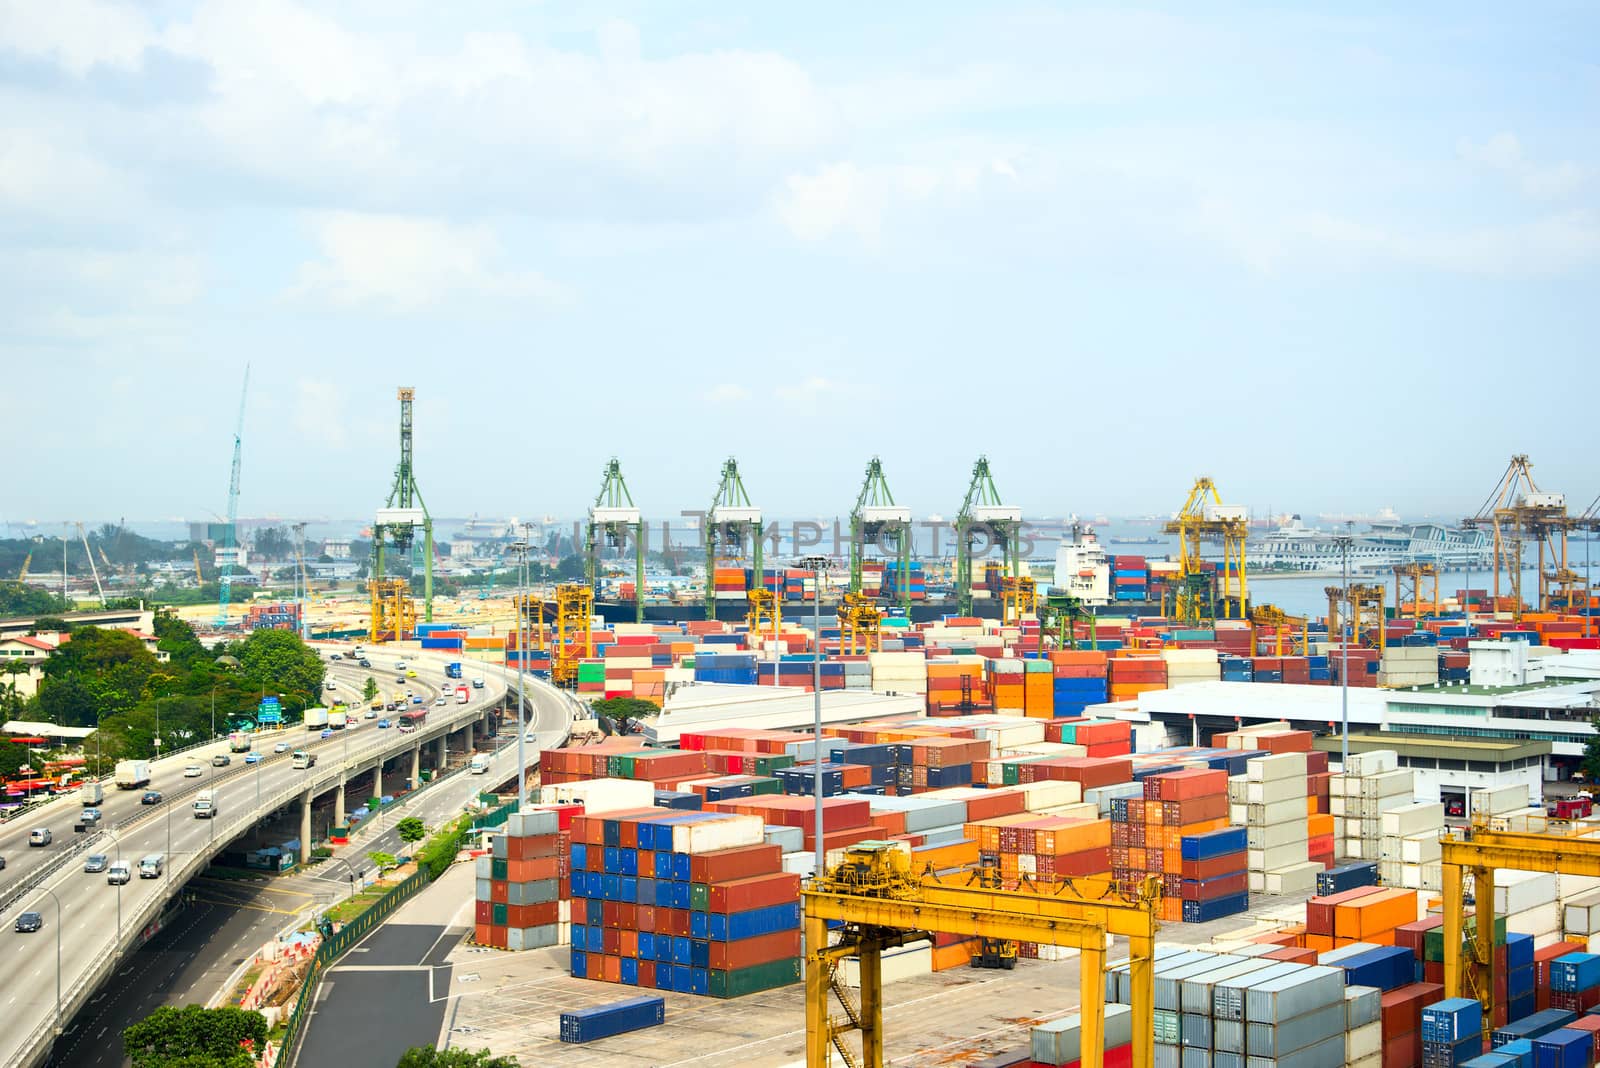 Panoramic view of industrial port of Singapore